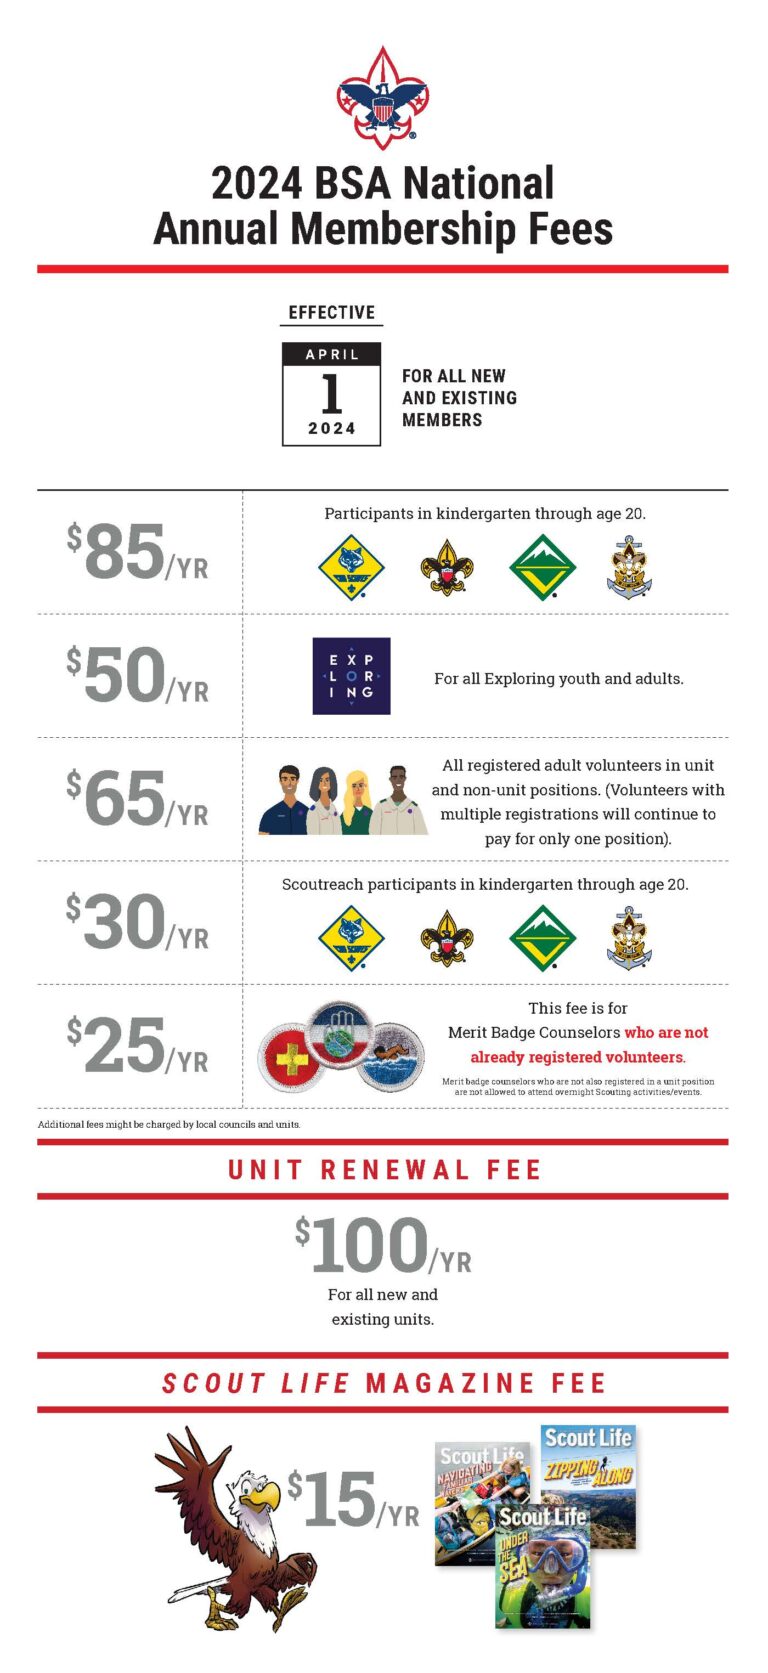 Infographic of 2024 BSA National Annual Membership Fees effective April 1, 2024